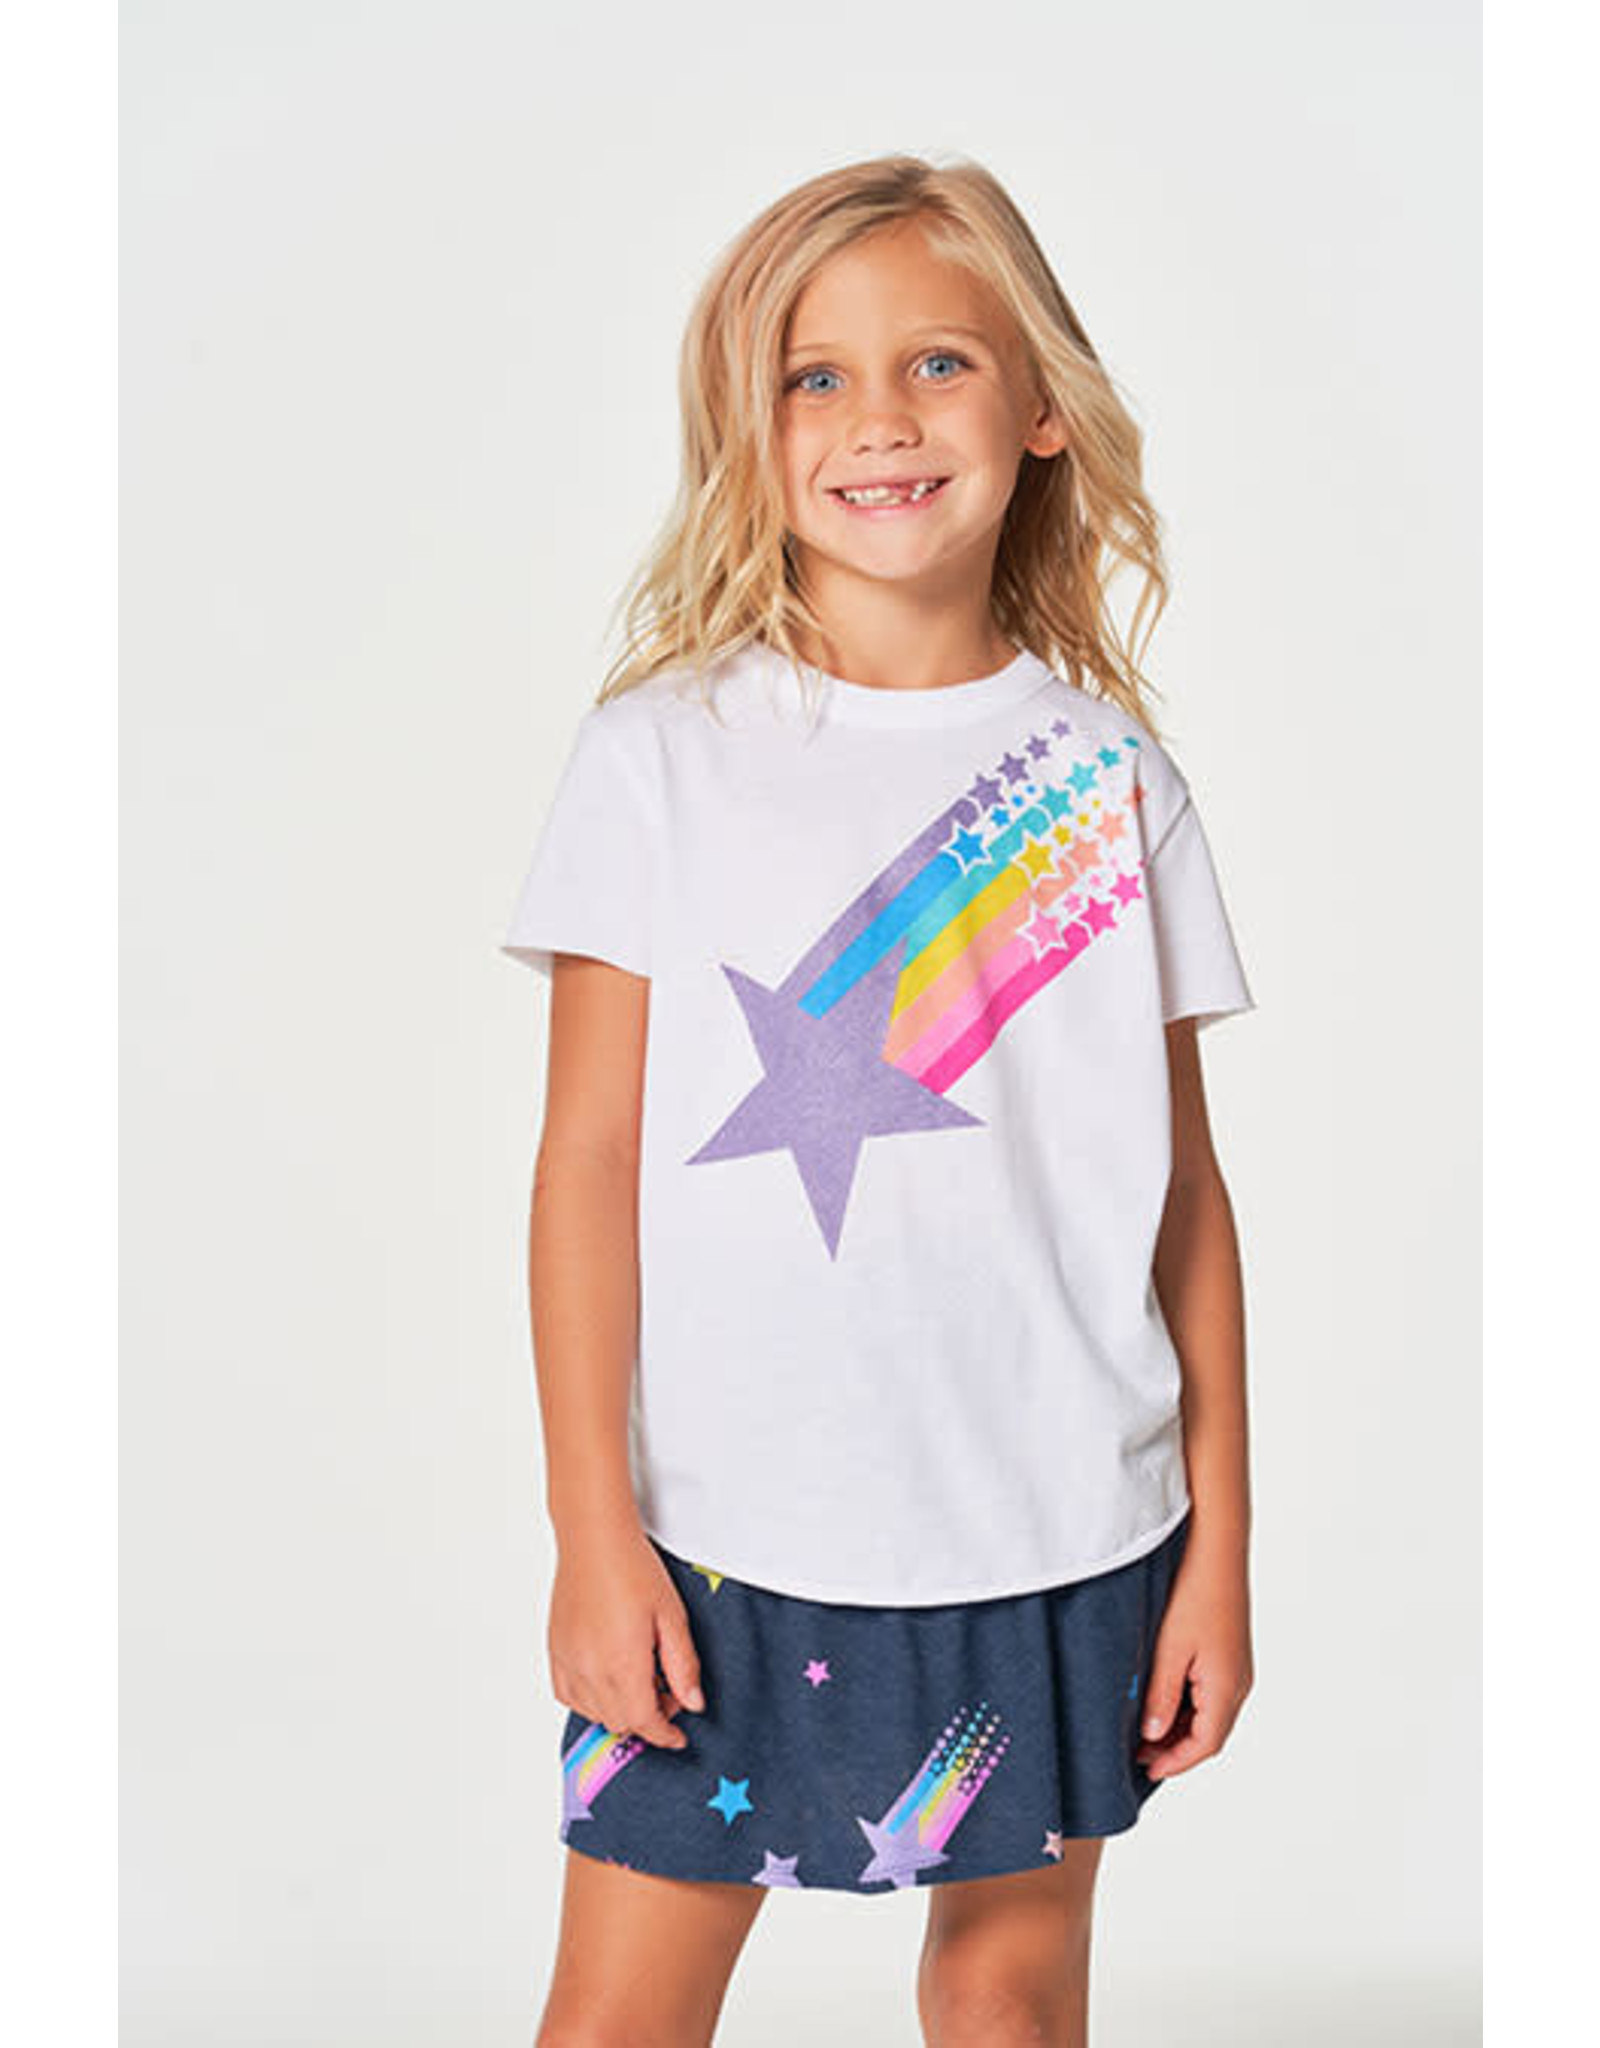 Chaser Chaser Girls Rainbow Shooting Star Tee